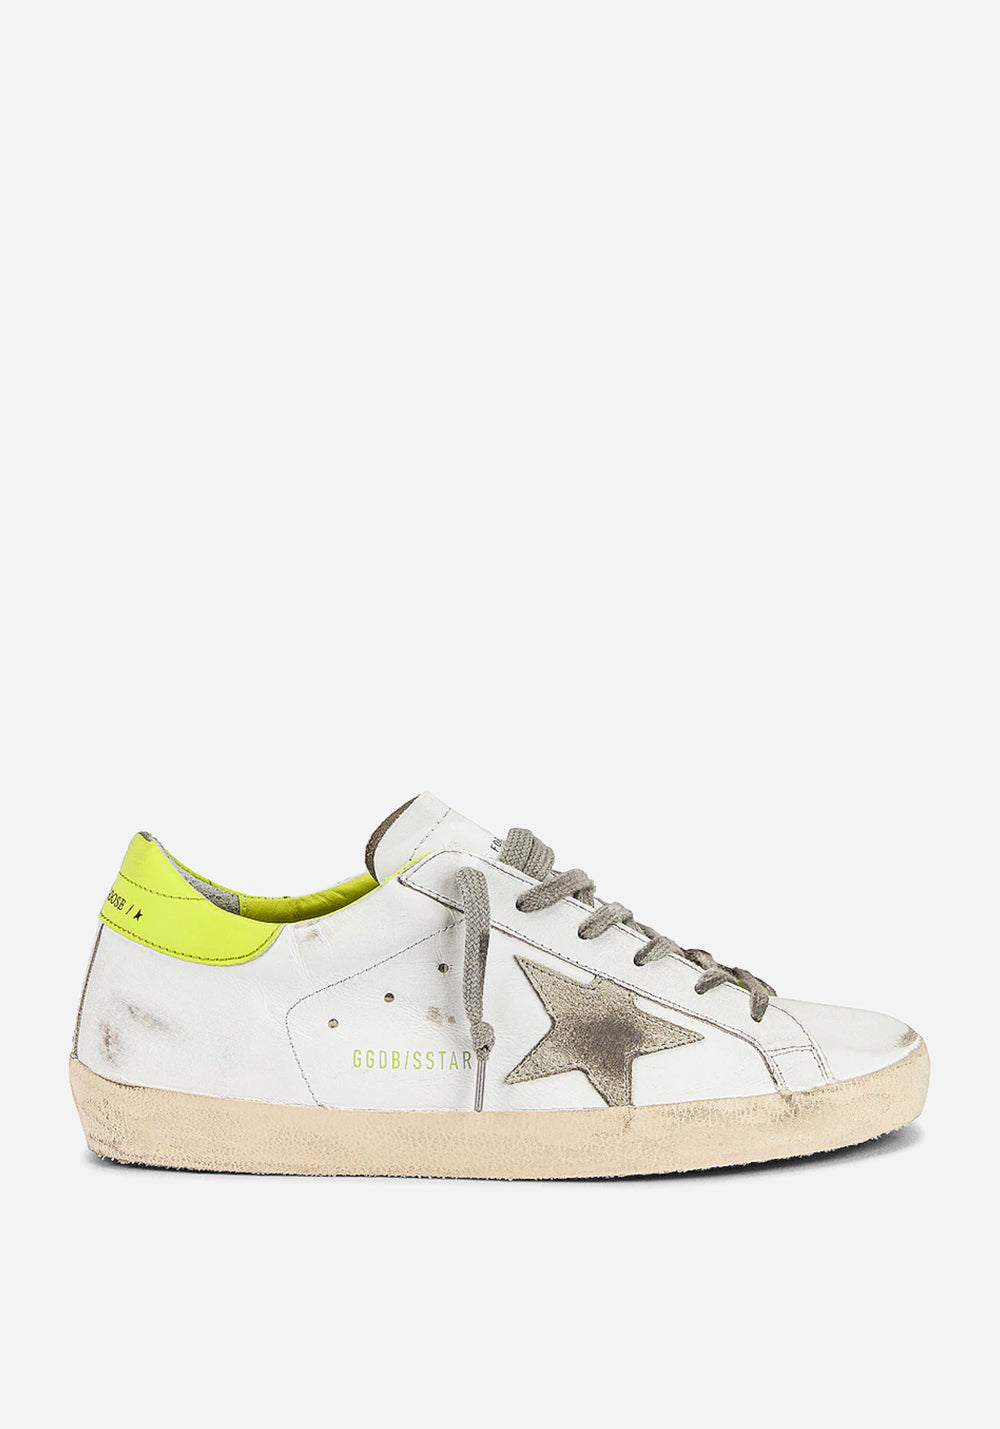 Super-Star Leather Upper And Heel Suede Star Cream Sole